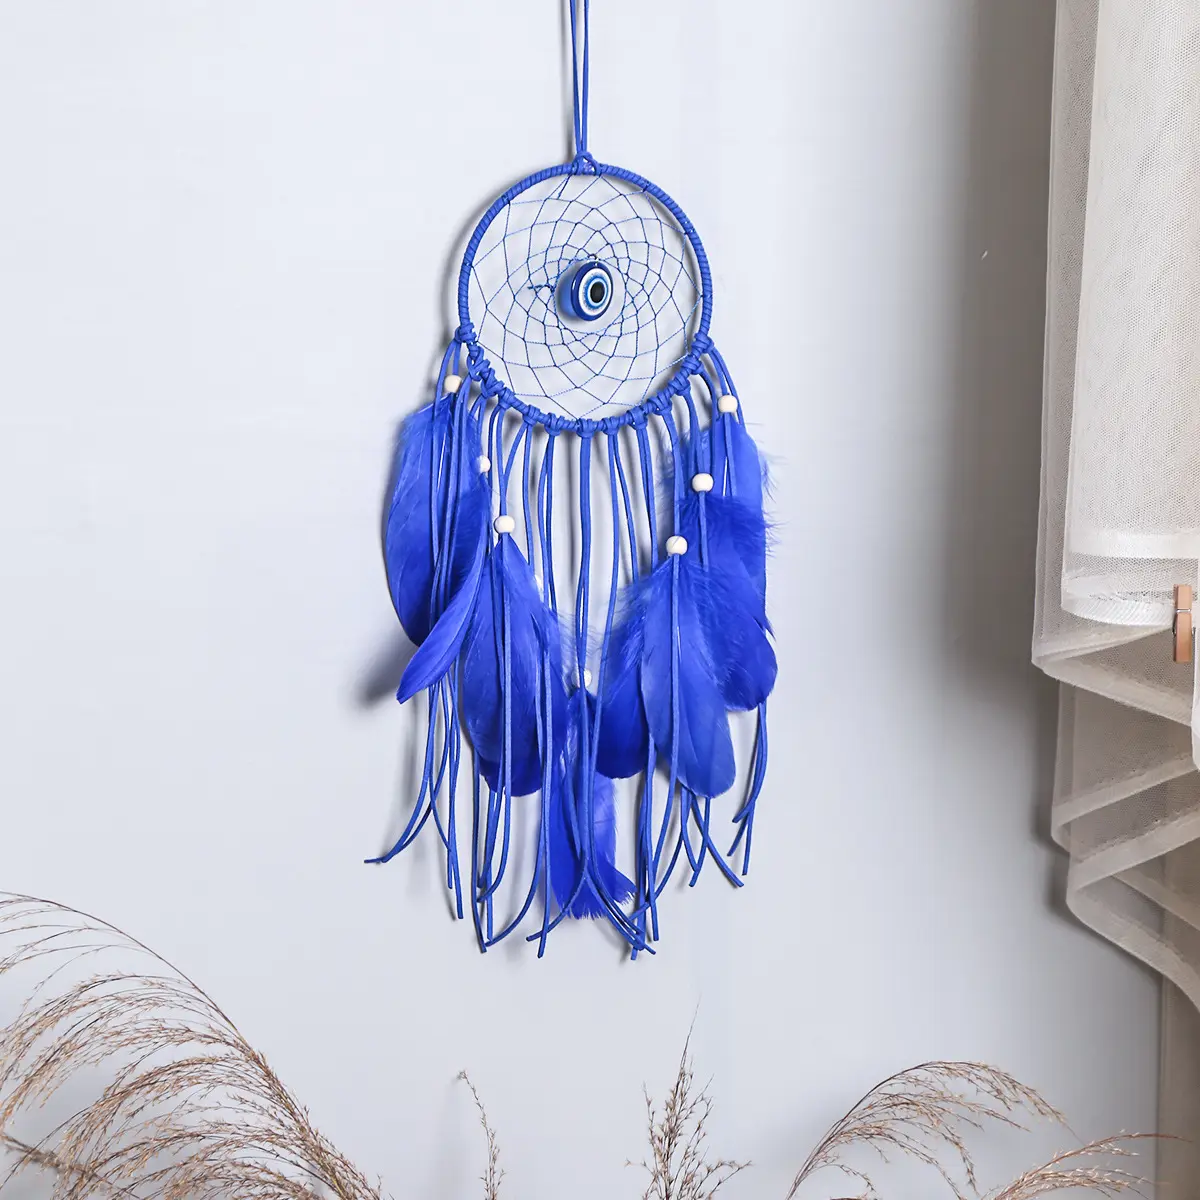 Handmade Macrame Blue Dreamcatcher Wall Charm Feather Evil Eye Dream Catcher for Wall Decor Home Offices Living Spaces